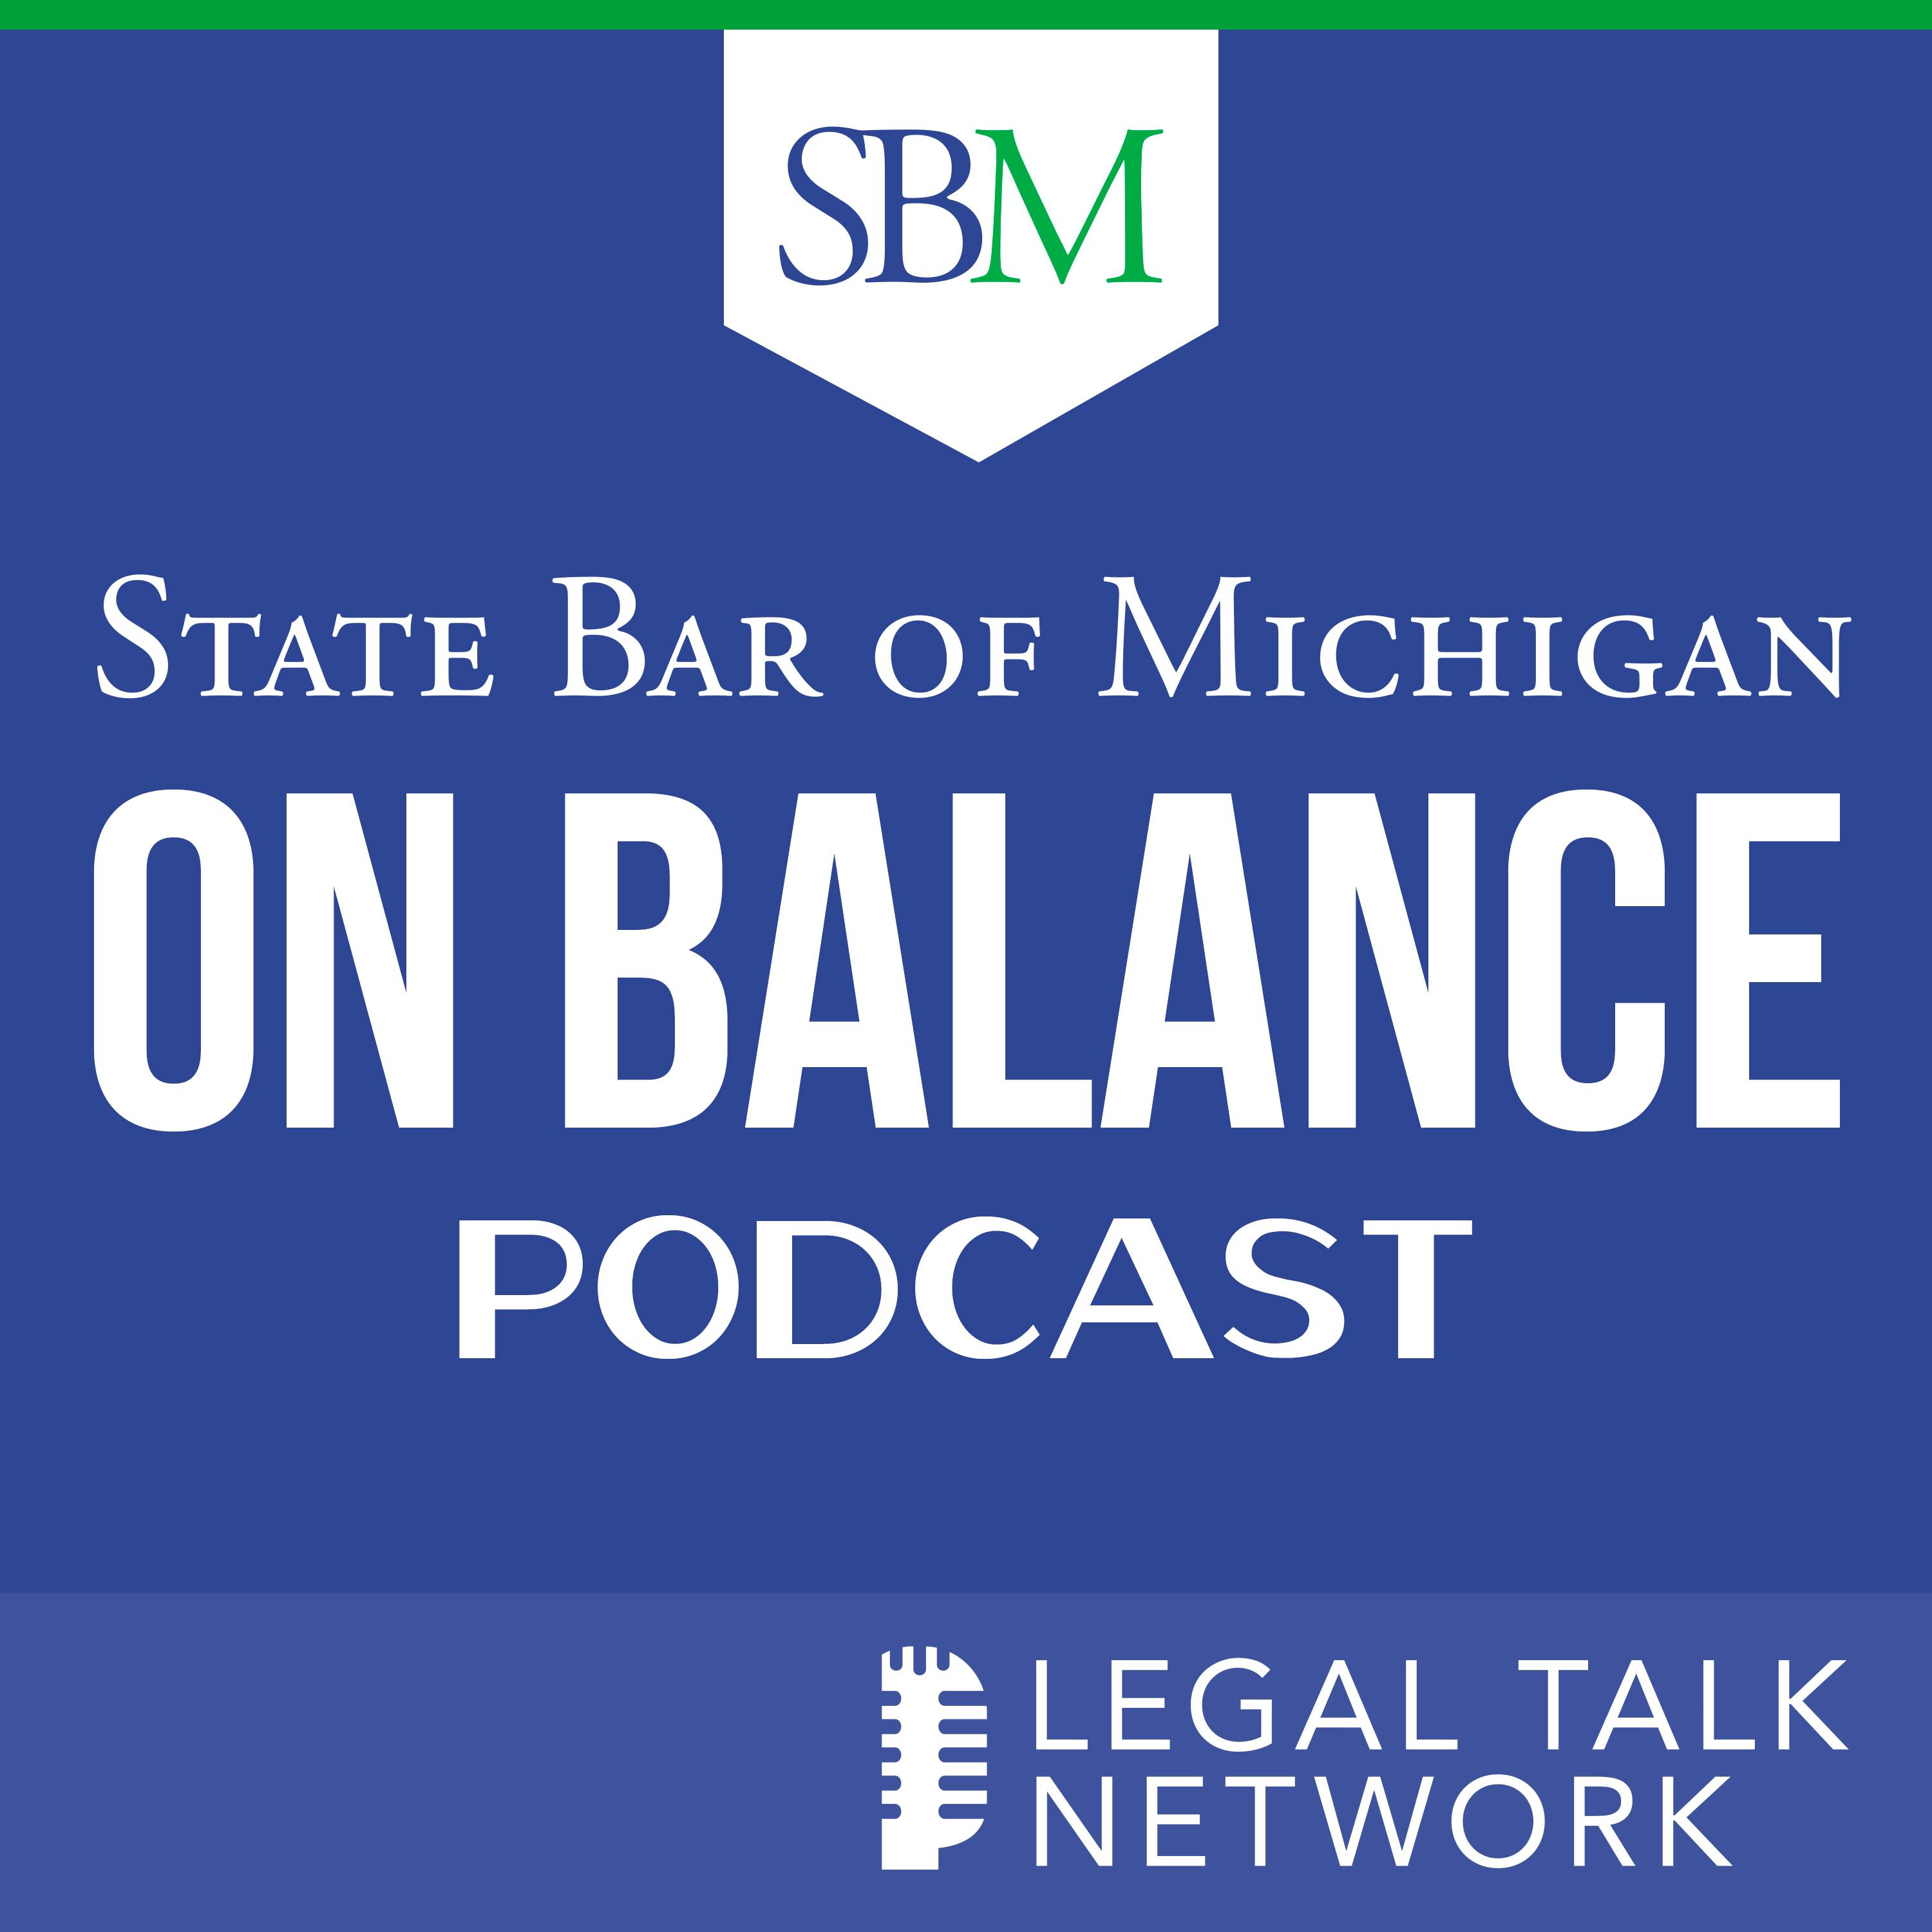 State Bar of Michigan NEXT Conference 2018: Alternative Dispute Resolution